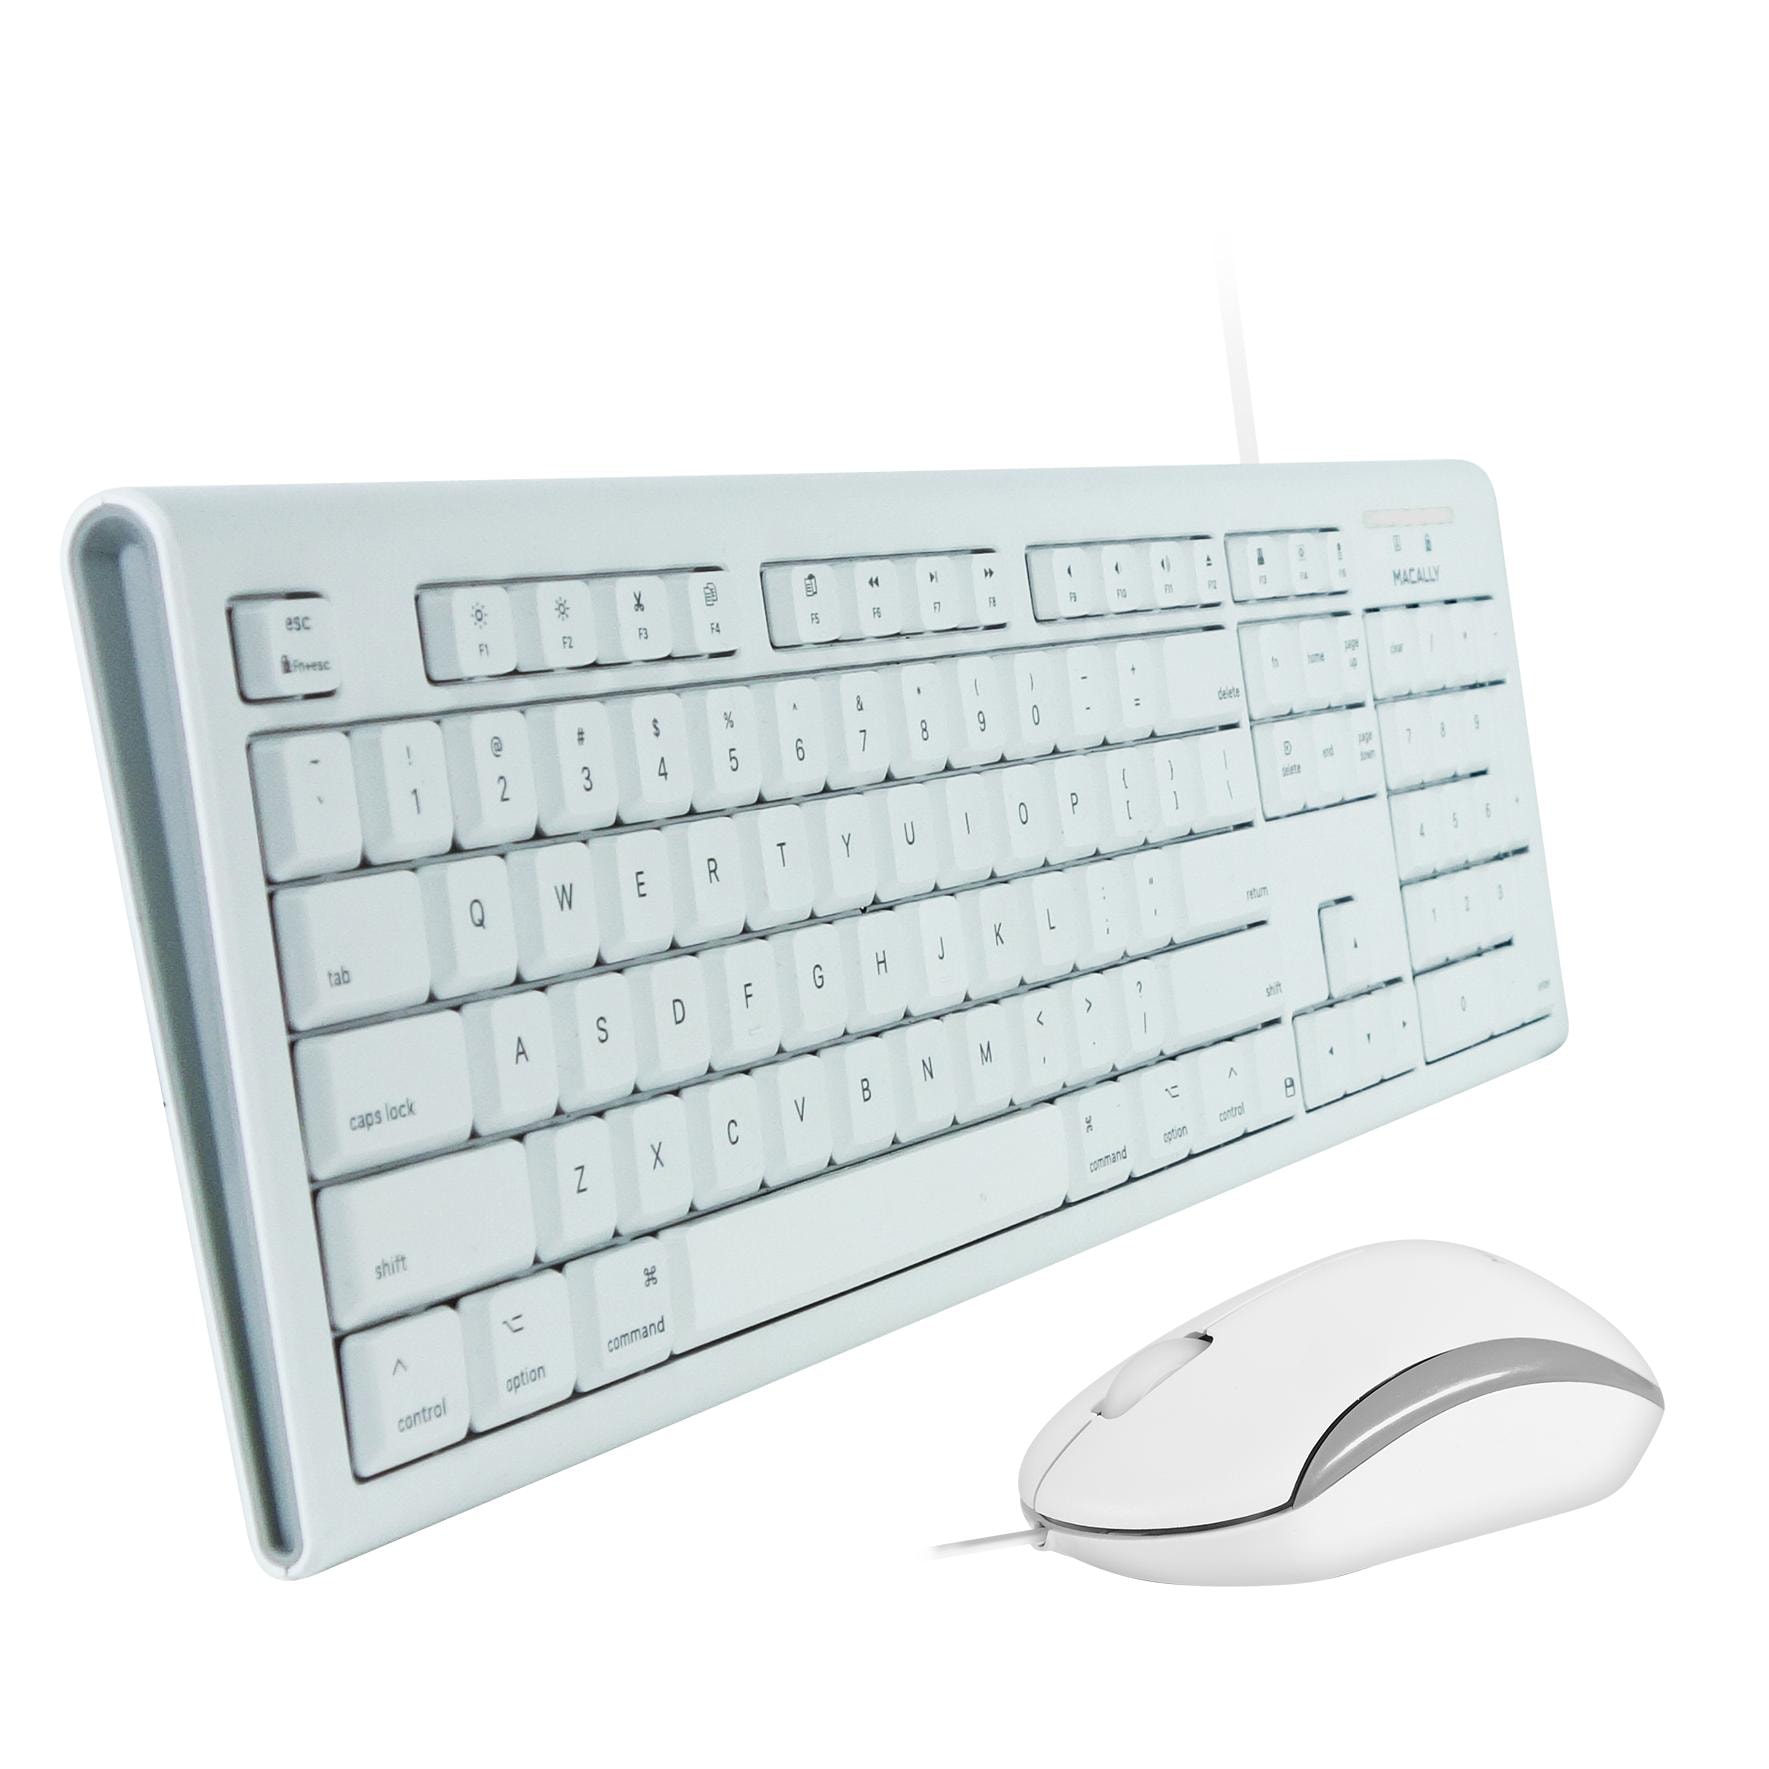 Macally Full-size Usb Wired Keyboard and Mouse Combo For Mac Mini Pro, Imac  Desktop Computer, Macbook Pro Air Desktop with 16 Compatible Apple  Shortcuts, Extended with Number Keypad, Rubber Domed Key Caps